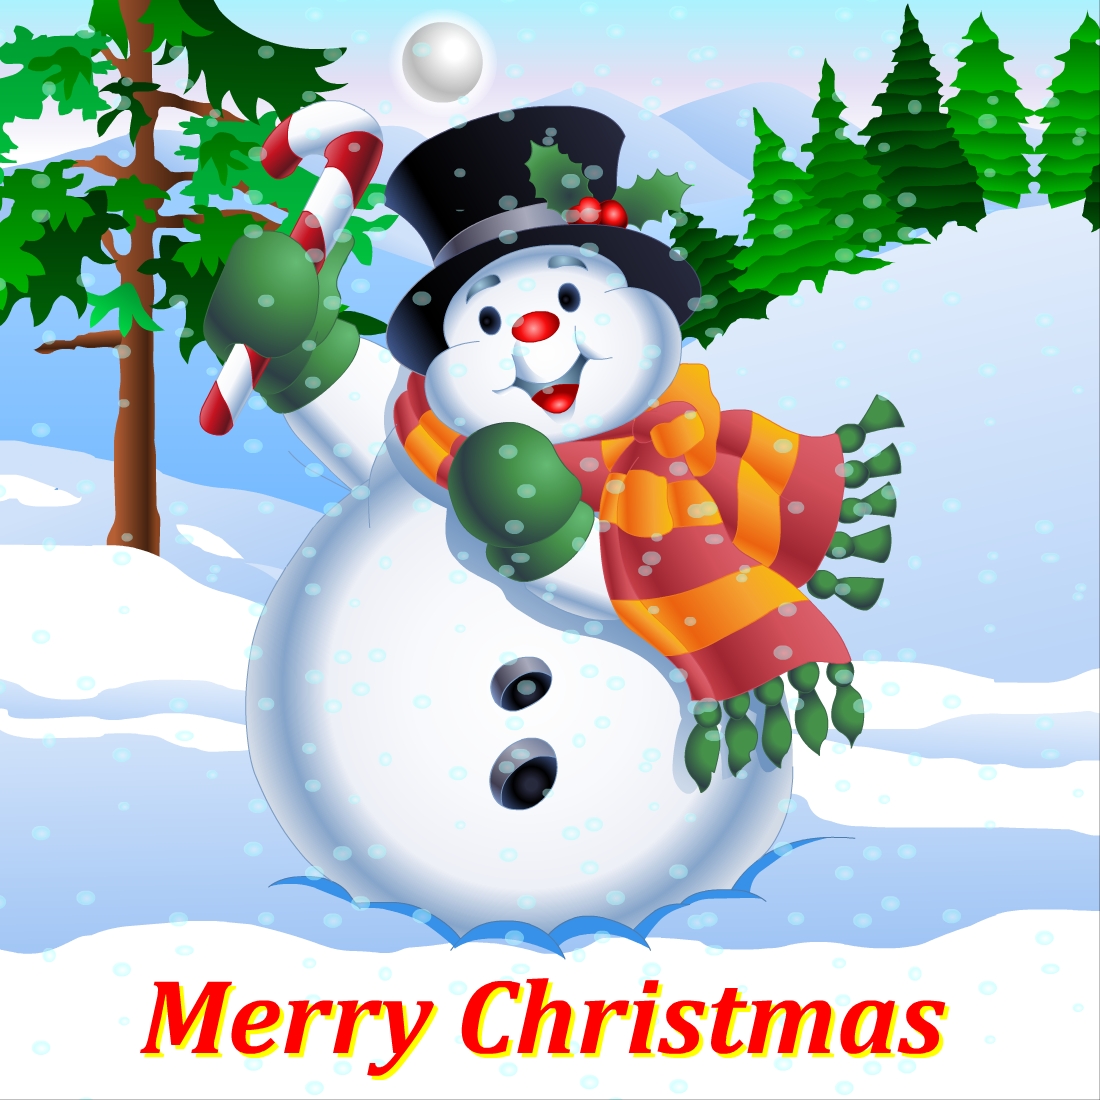 Merry Christmas Snowman Illustrations preview image.